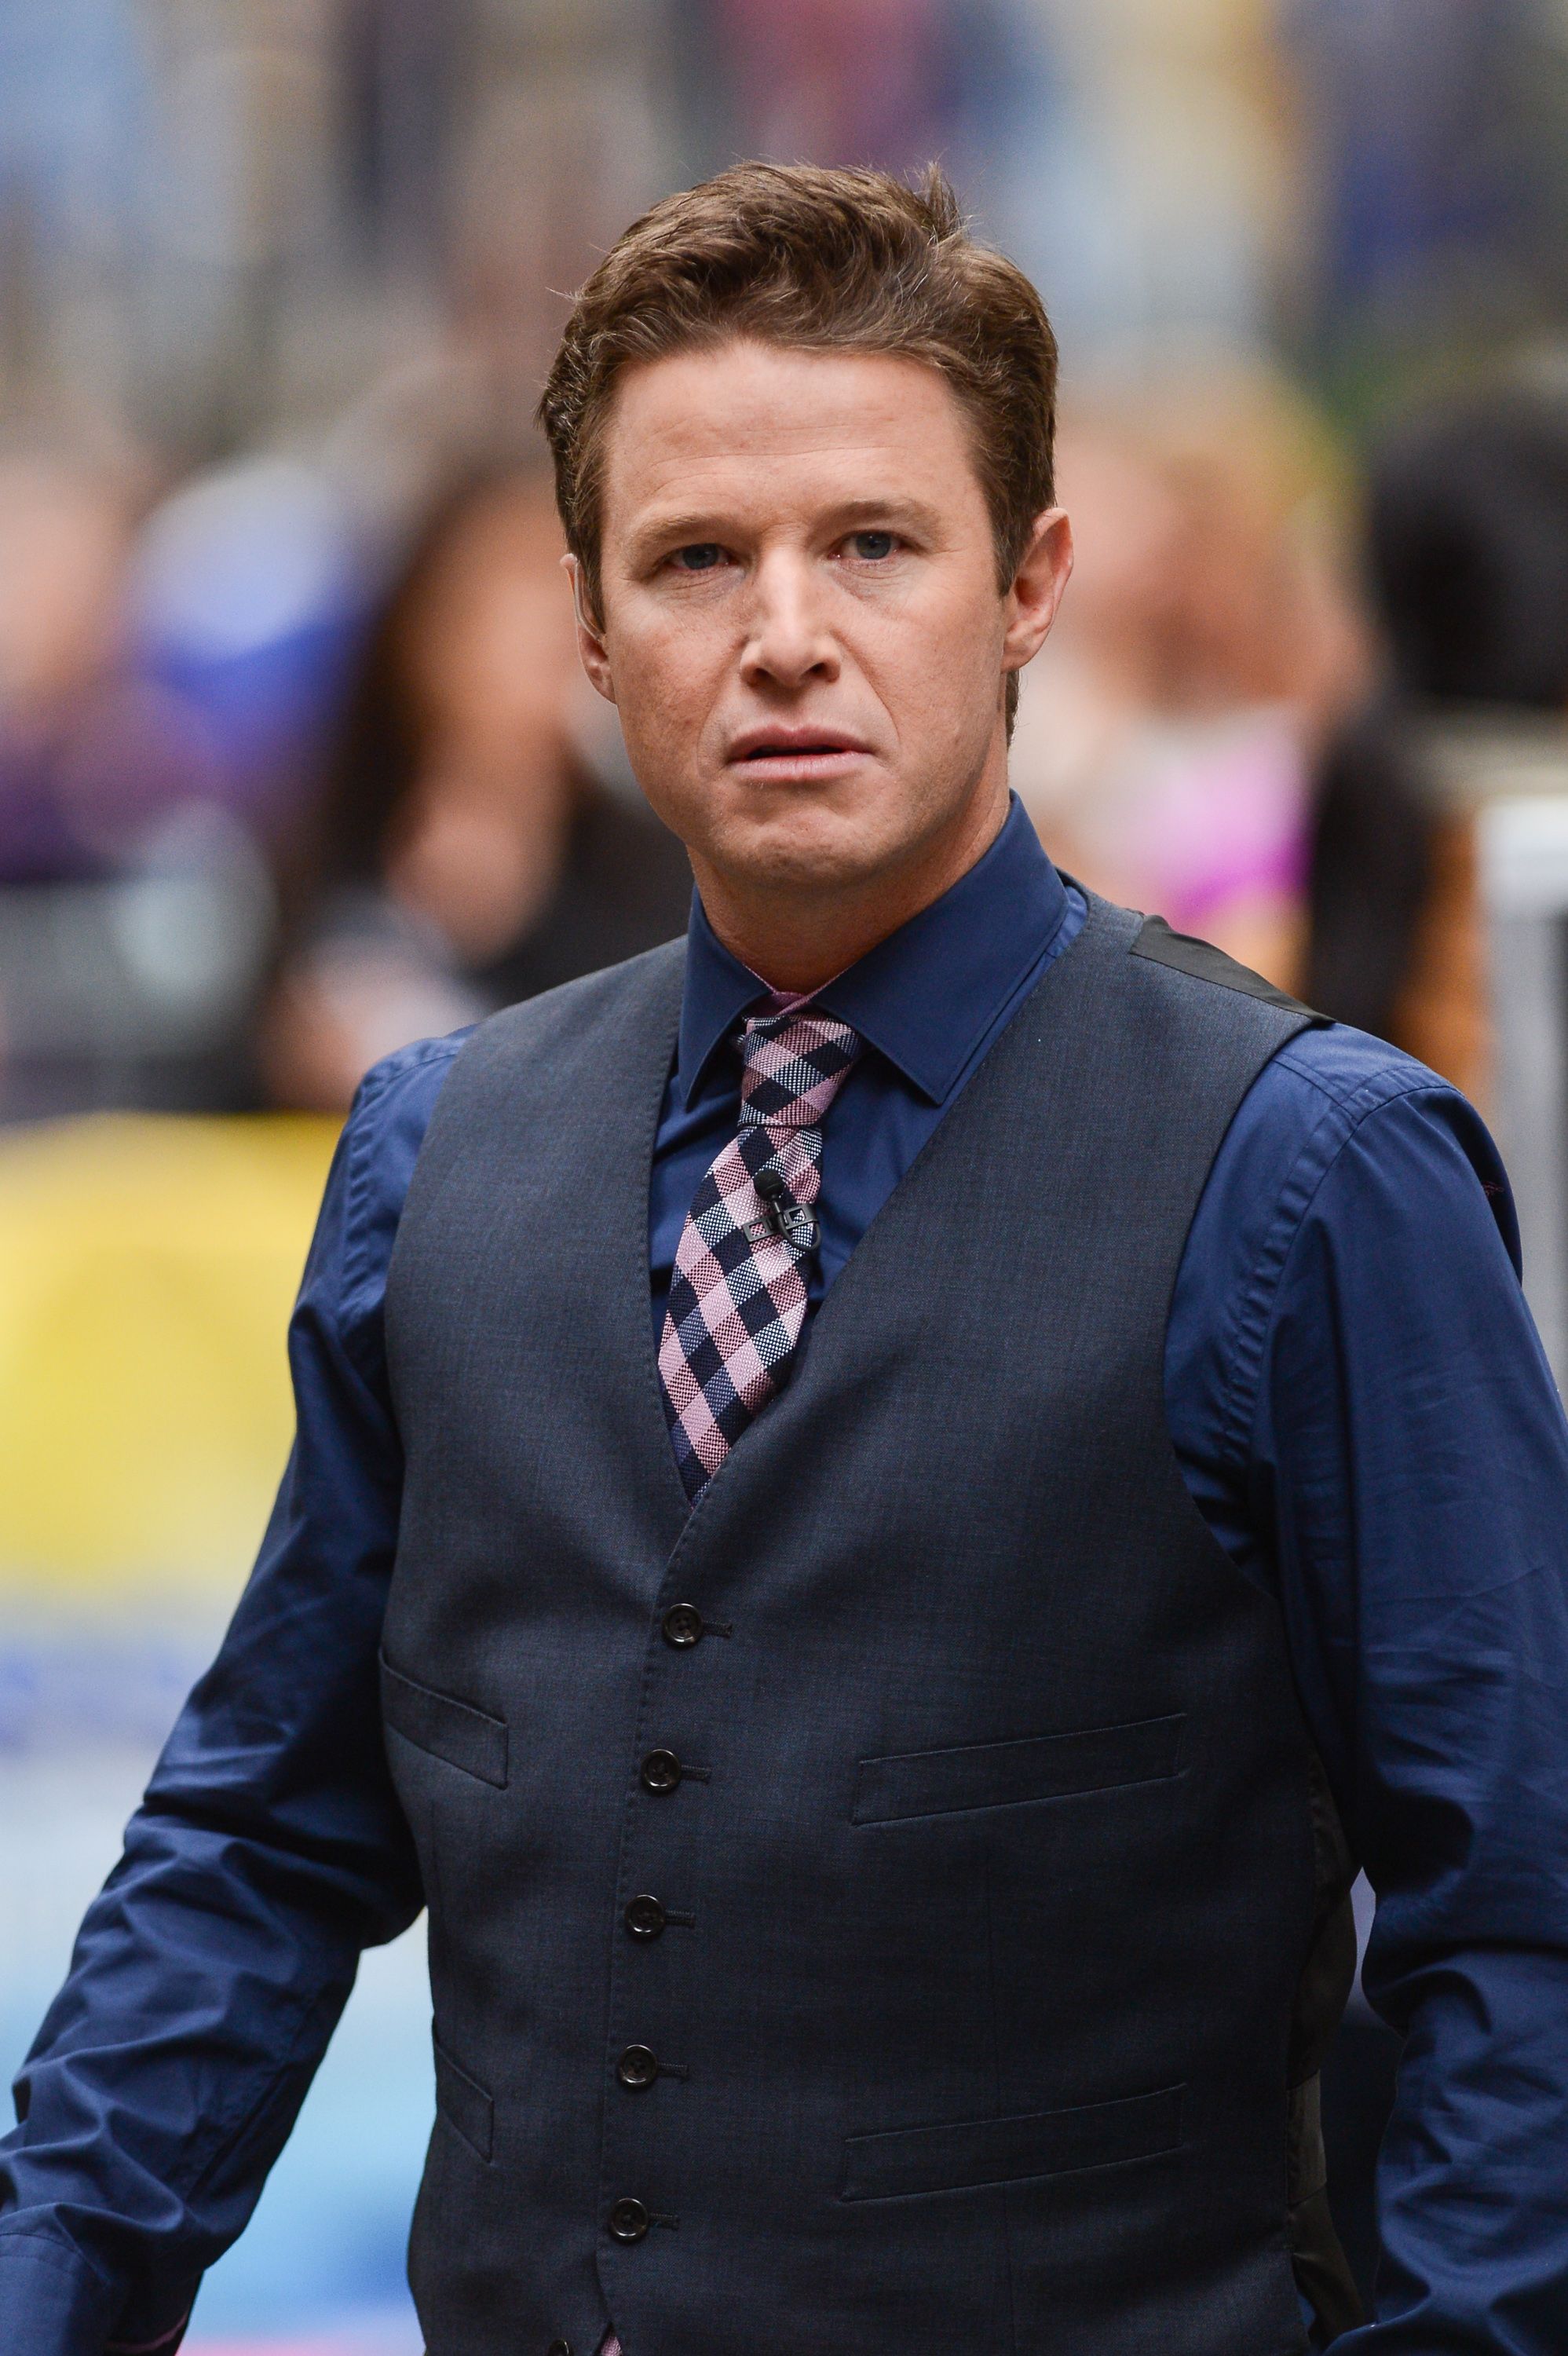 Billy Bush films "Access Hollywood Live" at the NBC Rockefeller Center Studios on October 26, 2012, in New York City | Photo: Ray Tamarra/Getty Images